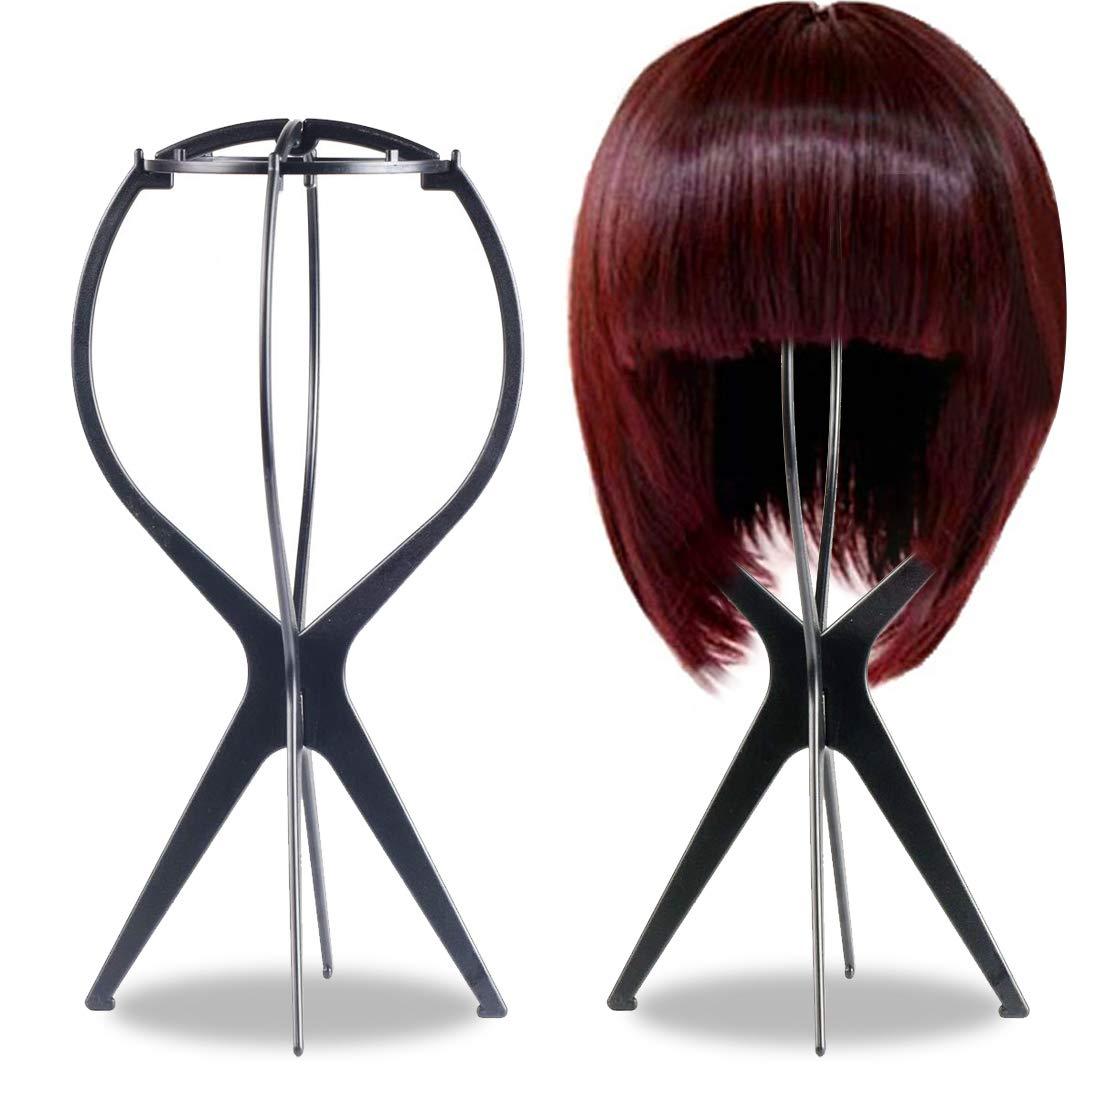  FOMIYES 6 Pcs plastic wig stand Portable Wig Dryer wig